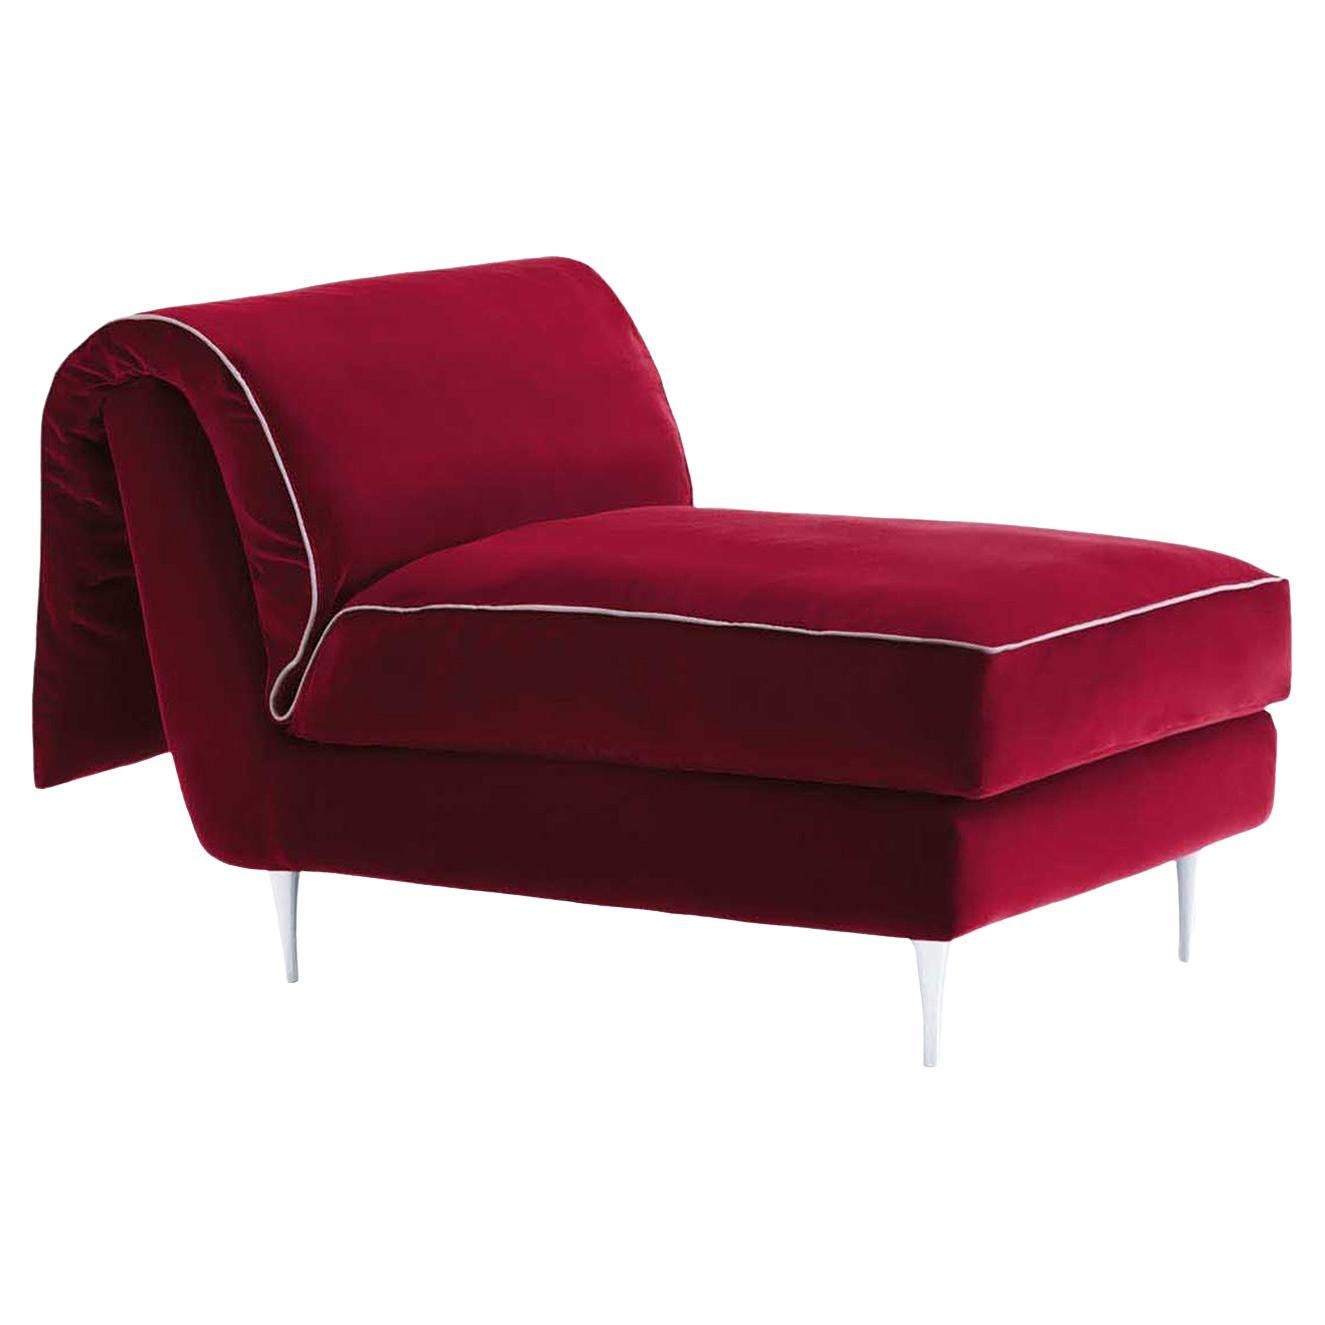 Casquet Mini in Passion Red Velvet Daybed For Sale